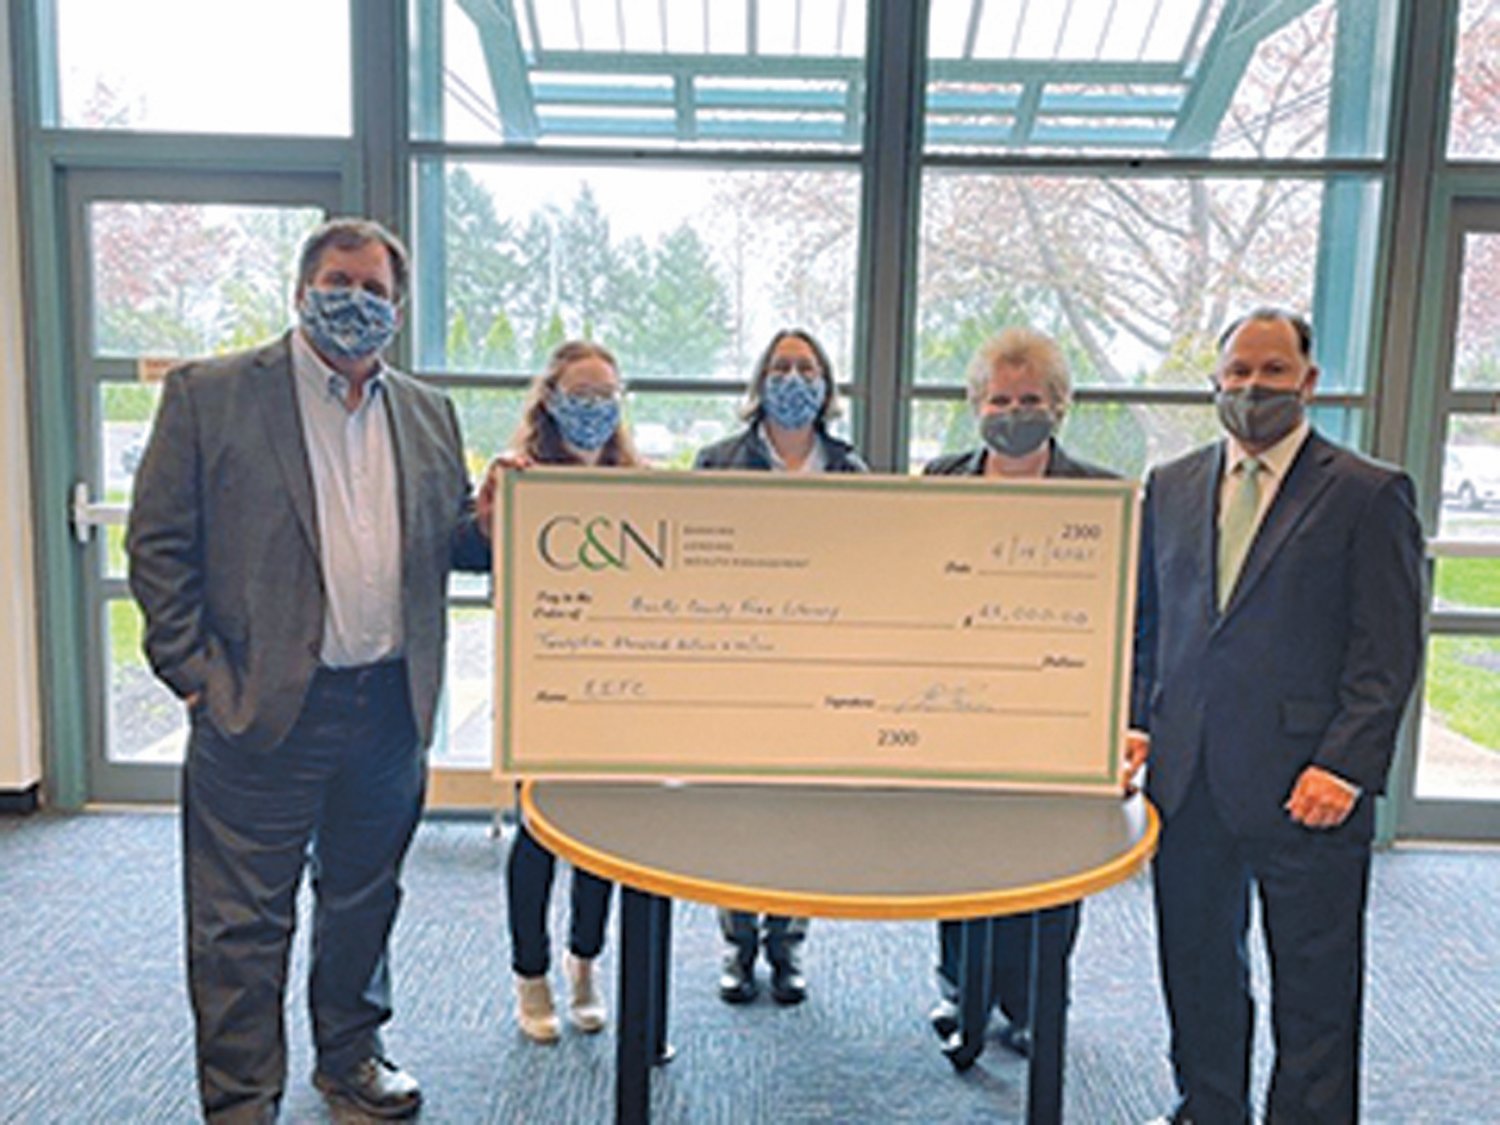 C&N’s Blair T. Rush and Lauri Dale present representatives of Bucks County Free Library with a check for $25,000 to support education in the community. From left are: John Doran, Jessica Gruber, Martina Kominiarek, Lauri Dale, and Blair T. Rush.